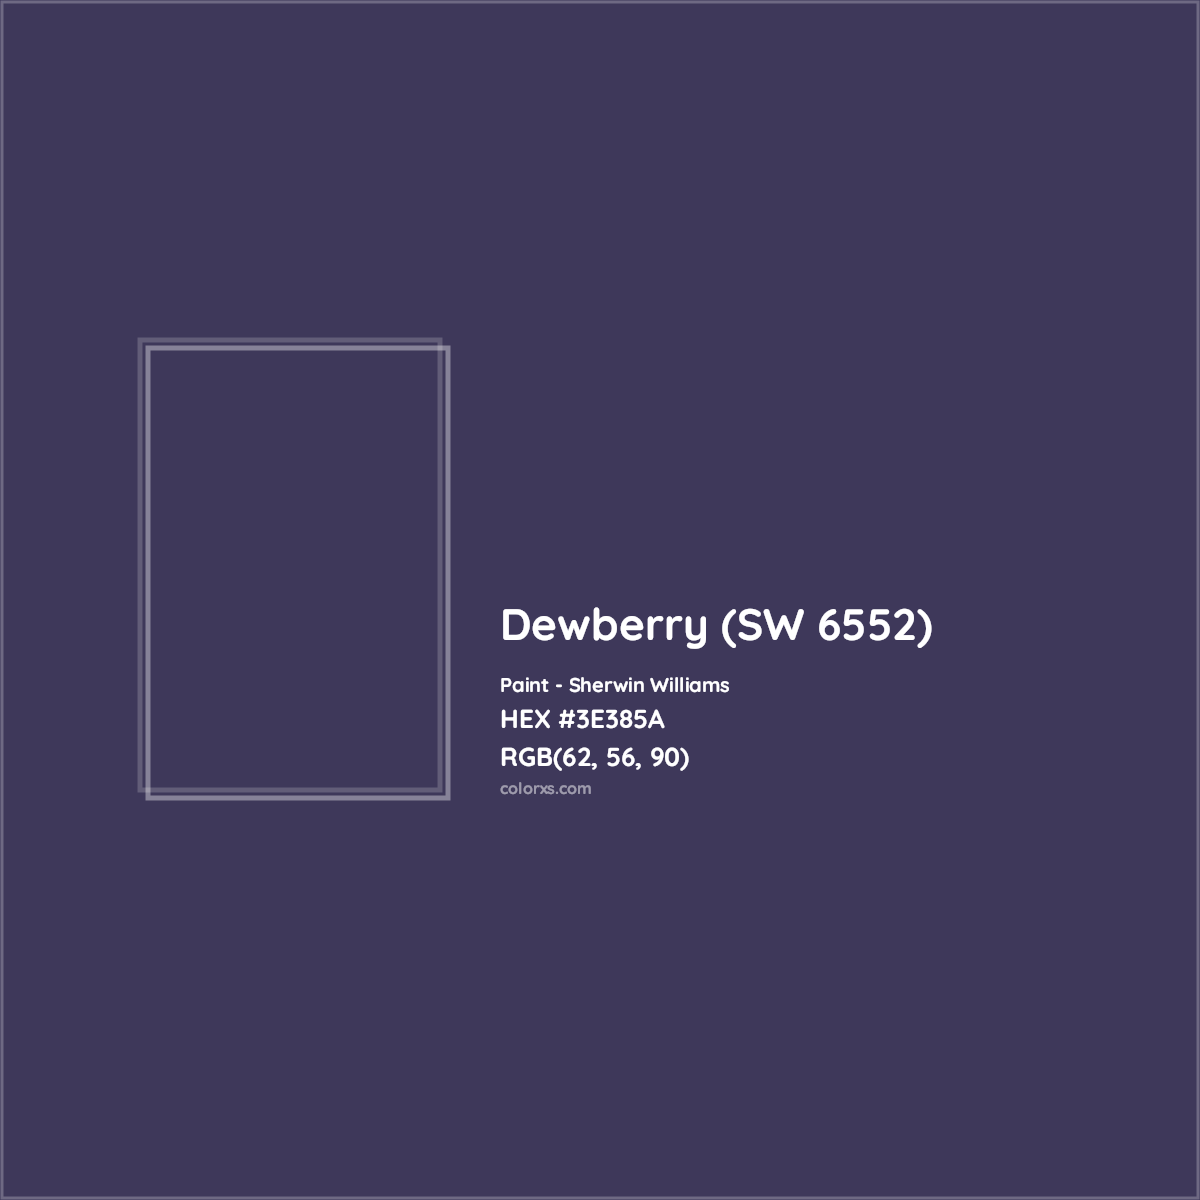 HEX #3E385A Dewberry (SW 6552) Paint Sherwin Williams - Color Code